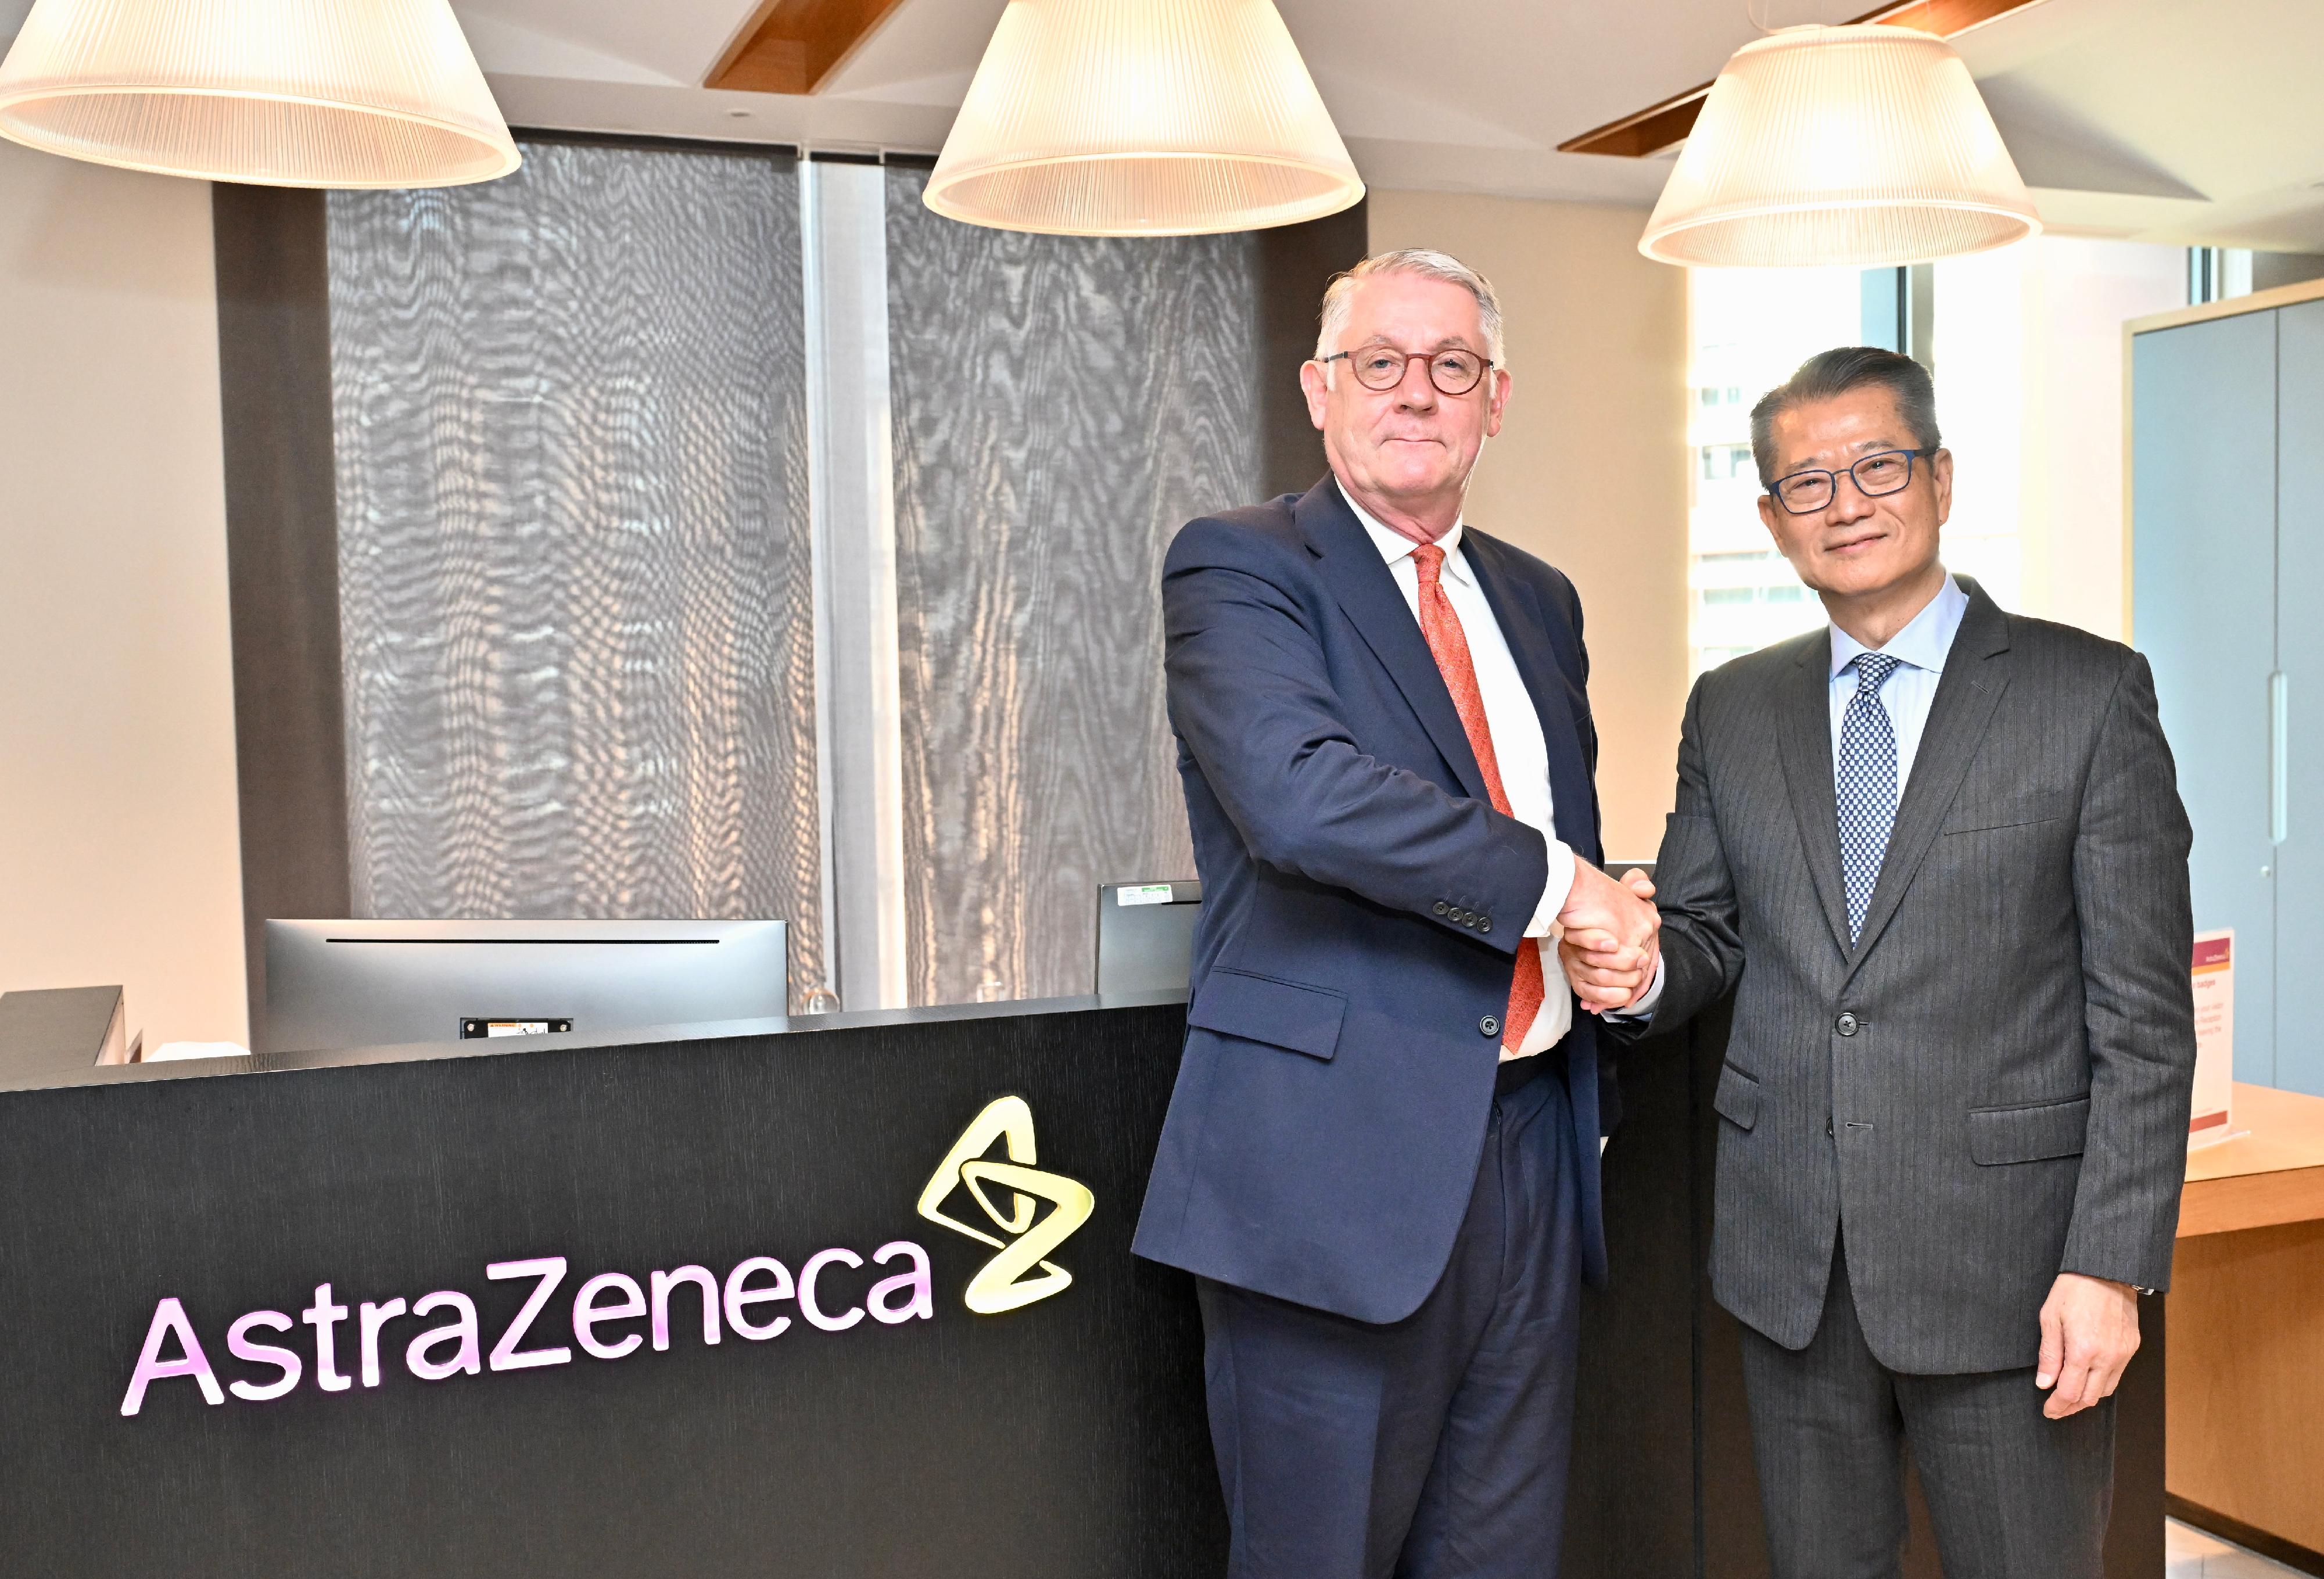 The Financial Secretary, Mr Paul Chan, continued his visit to London, the UK yesterday (September 22, London time), and visited international biopharmaceutical company AstraZeneca. Photo shows Mr Chan (right) and Senior Vice-President of AstraZeneca, Mr Shaun Grady.